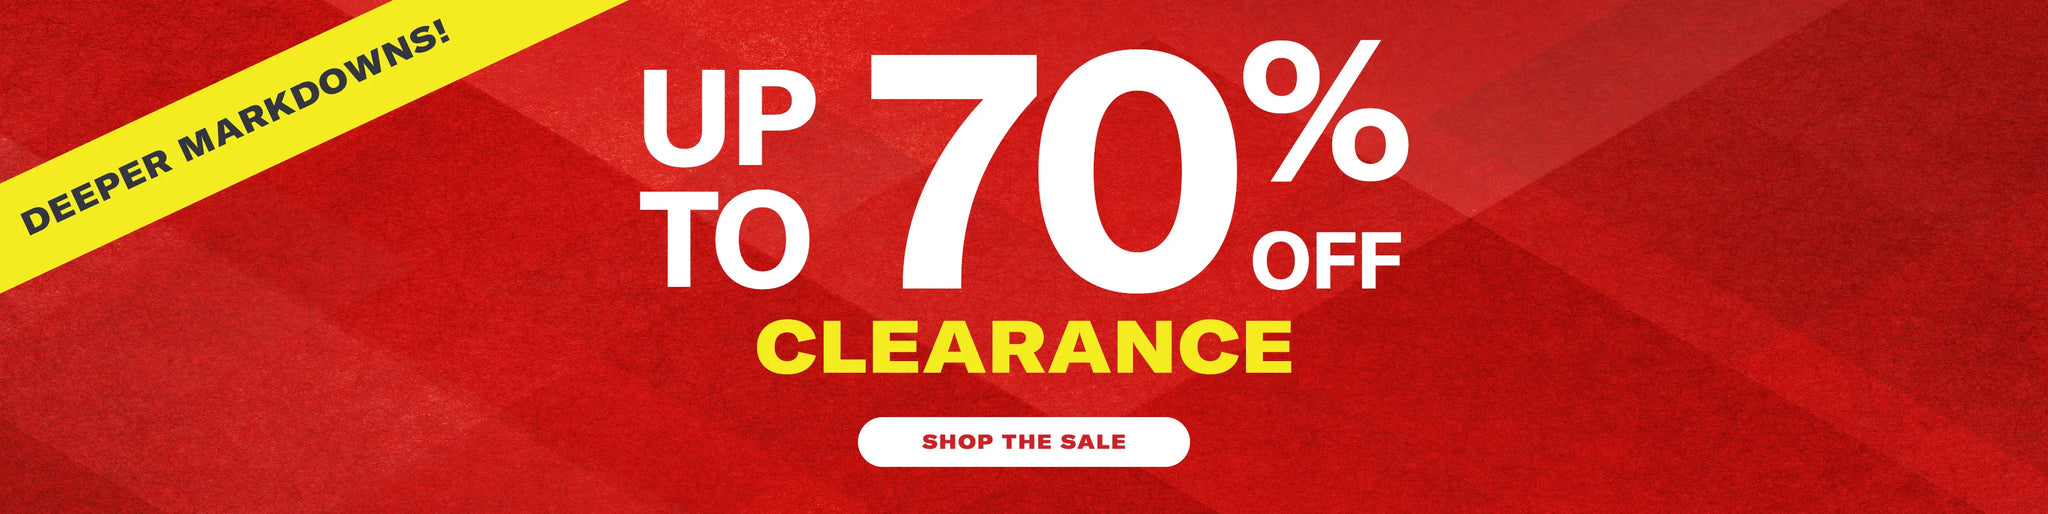 Clearance Blowout Sale | Up to 70% Off Bestselling Big & Tall Men's Clothing at George Richards | Canada | Plus Size Menswear